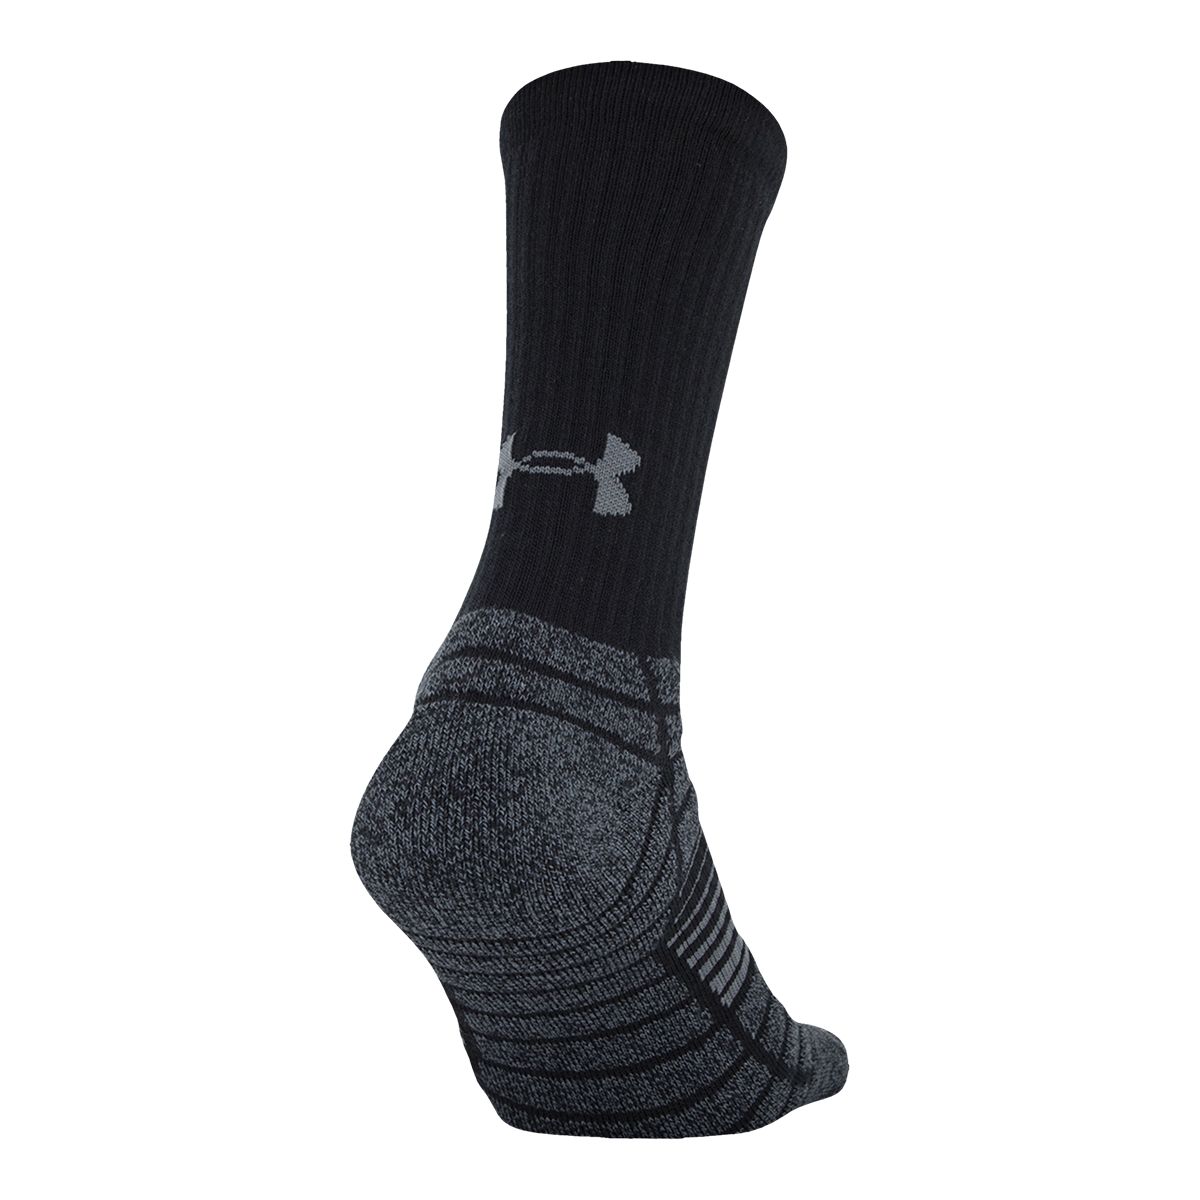 Under Armour Men's Elevated + Crew Socks, Padded, 3-Pack